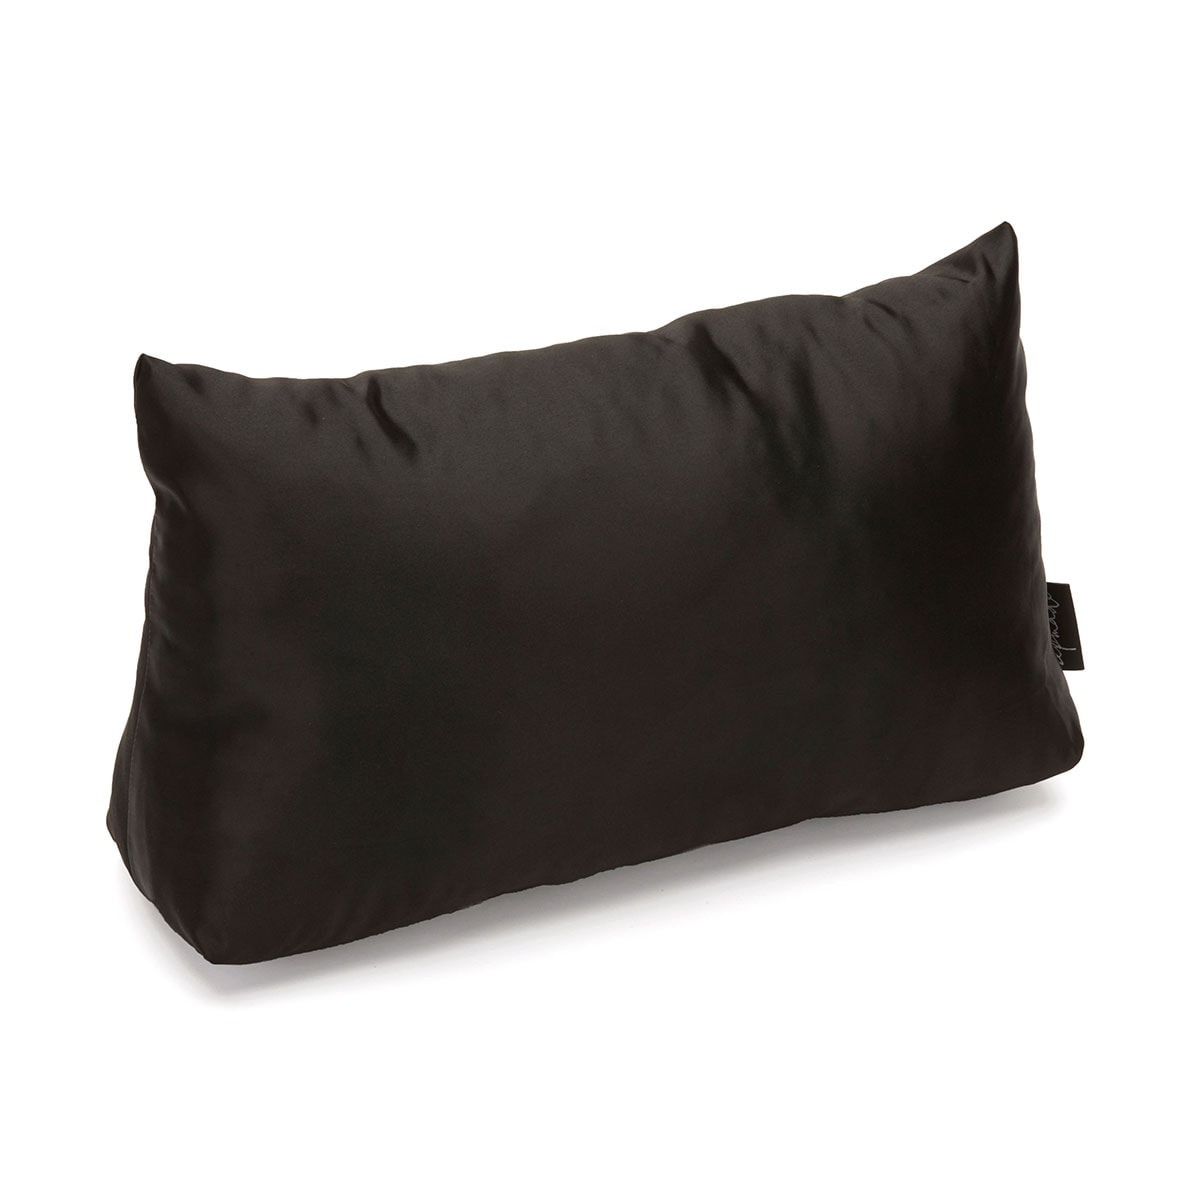 PURSE PILLOW INSERTS - Individual Sizes